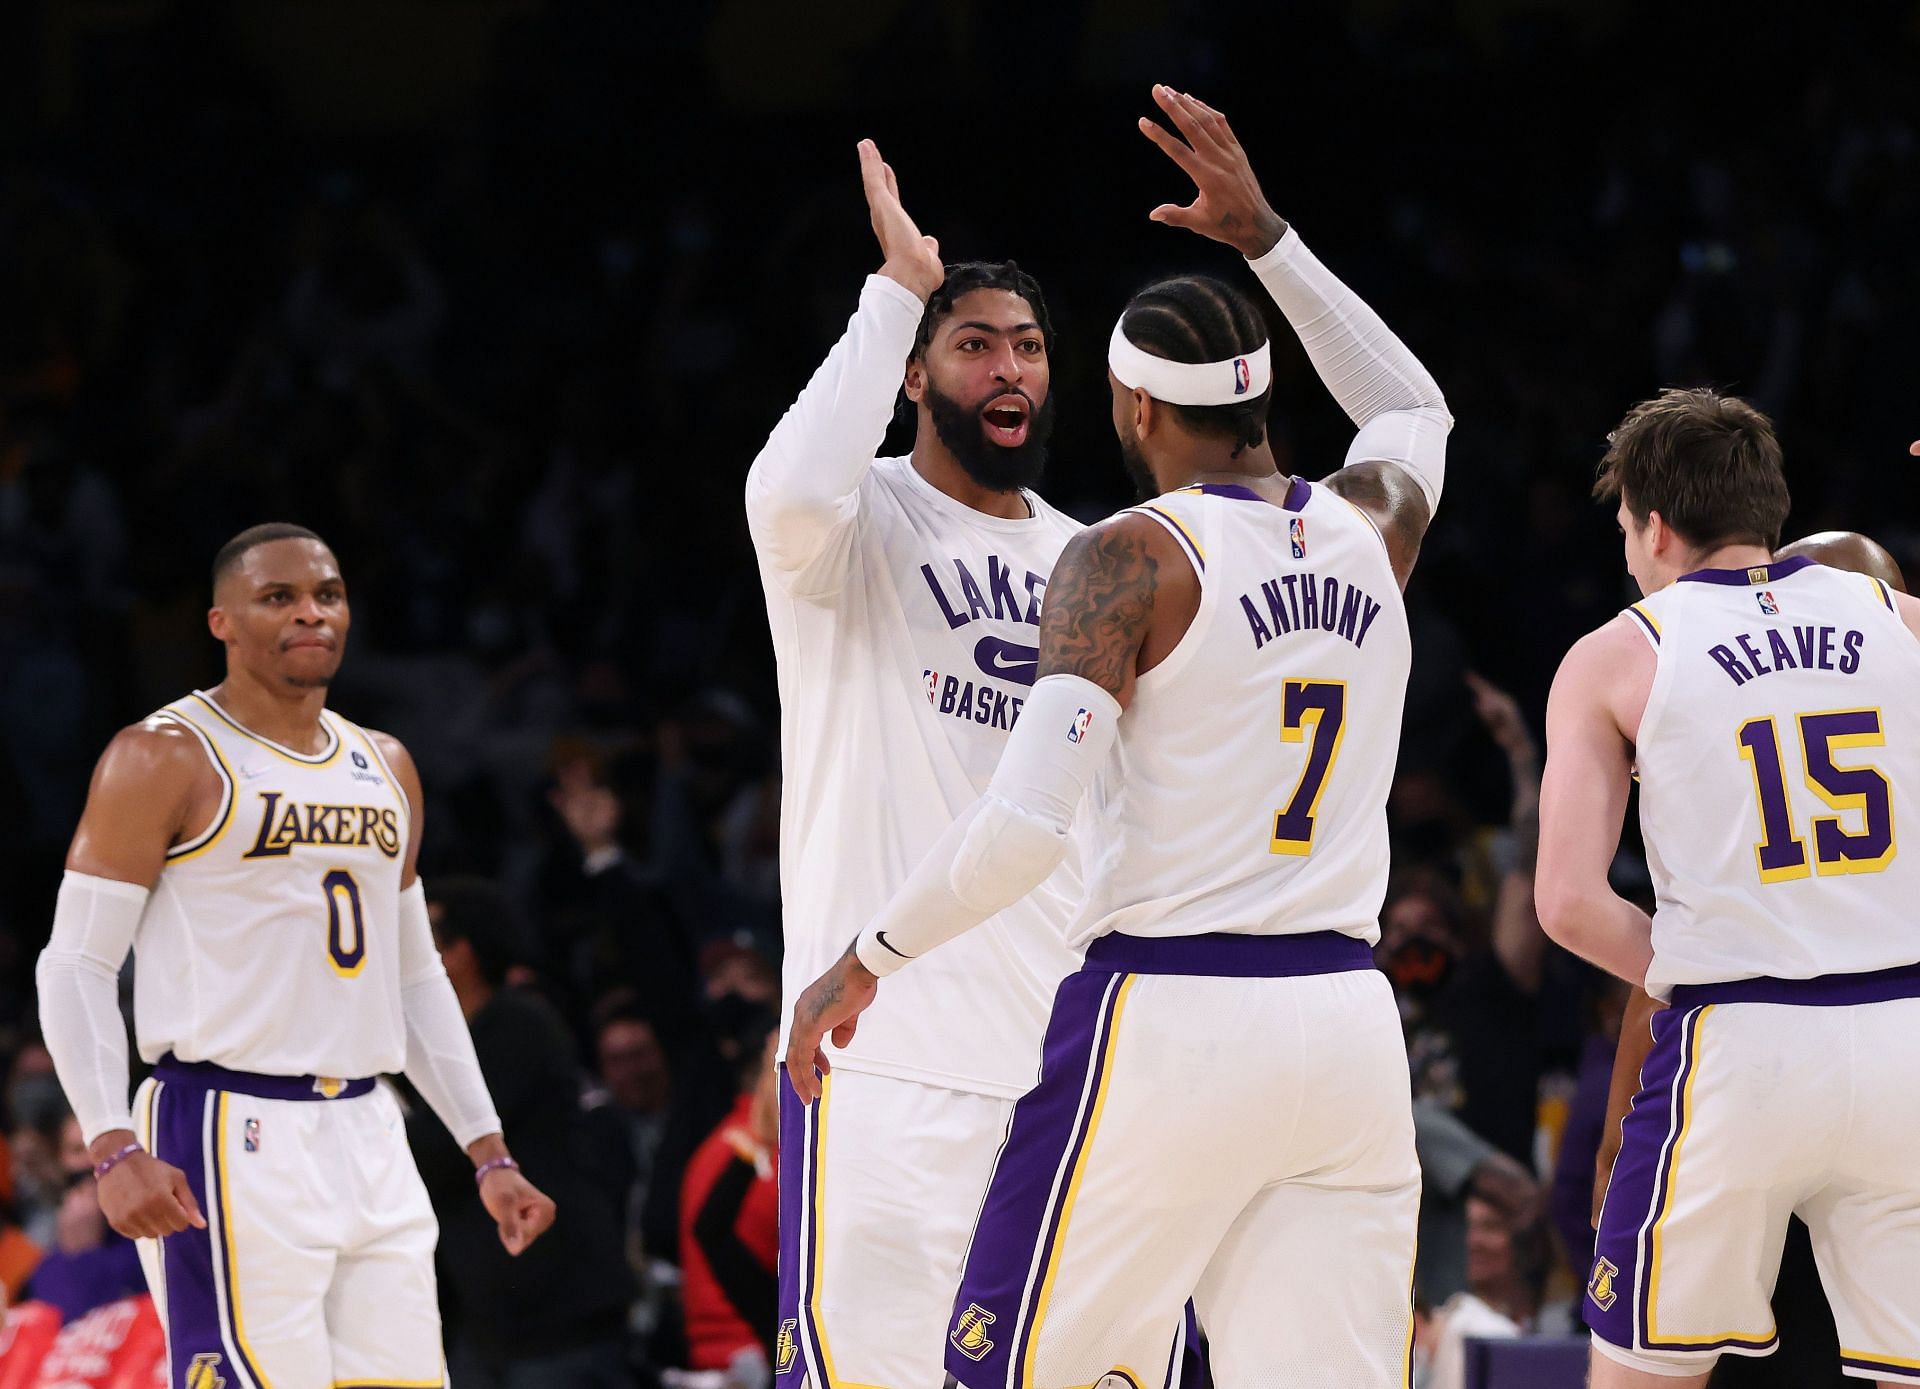 The LA Lakers celebrate while heading to the bench after a timeout.